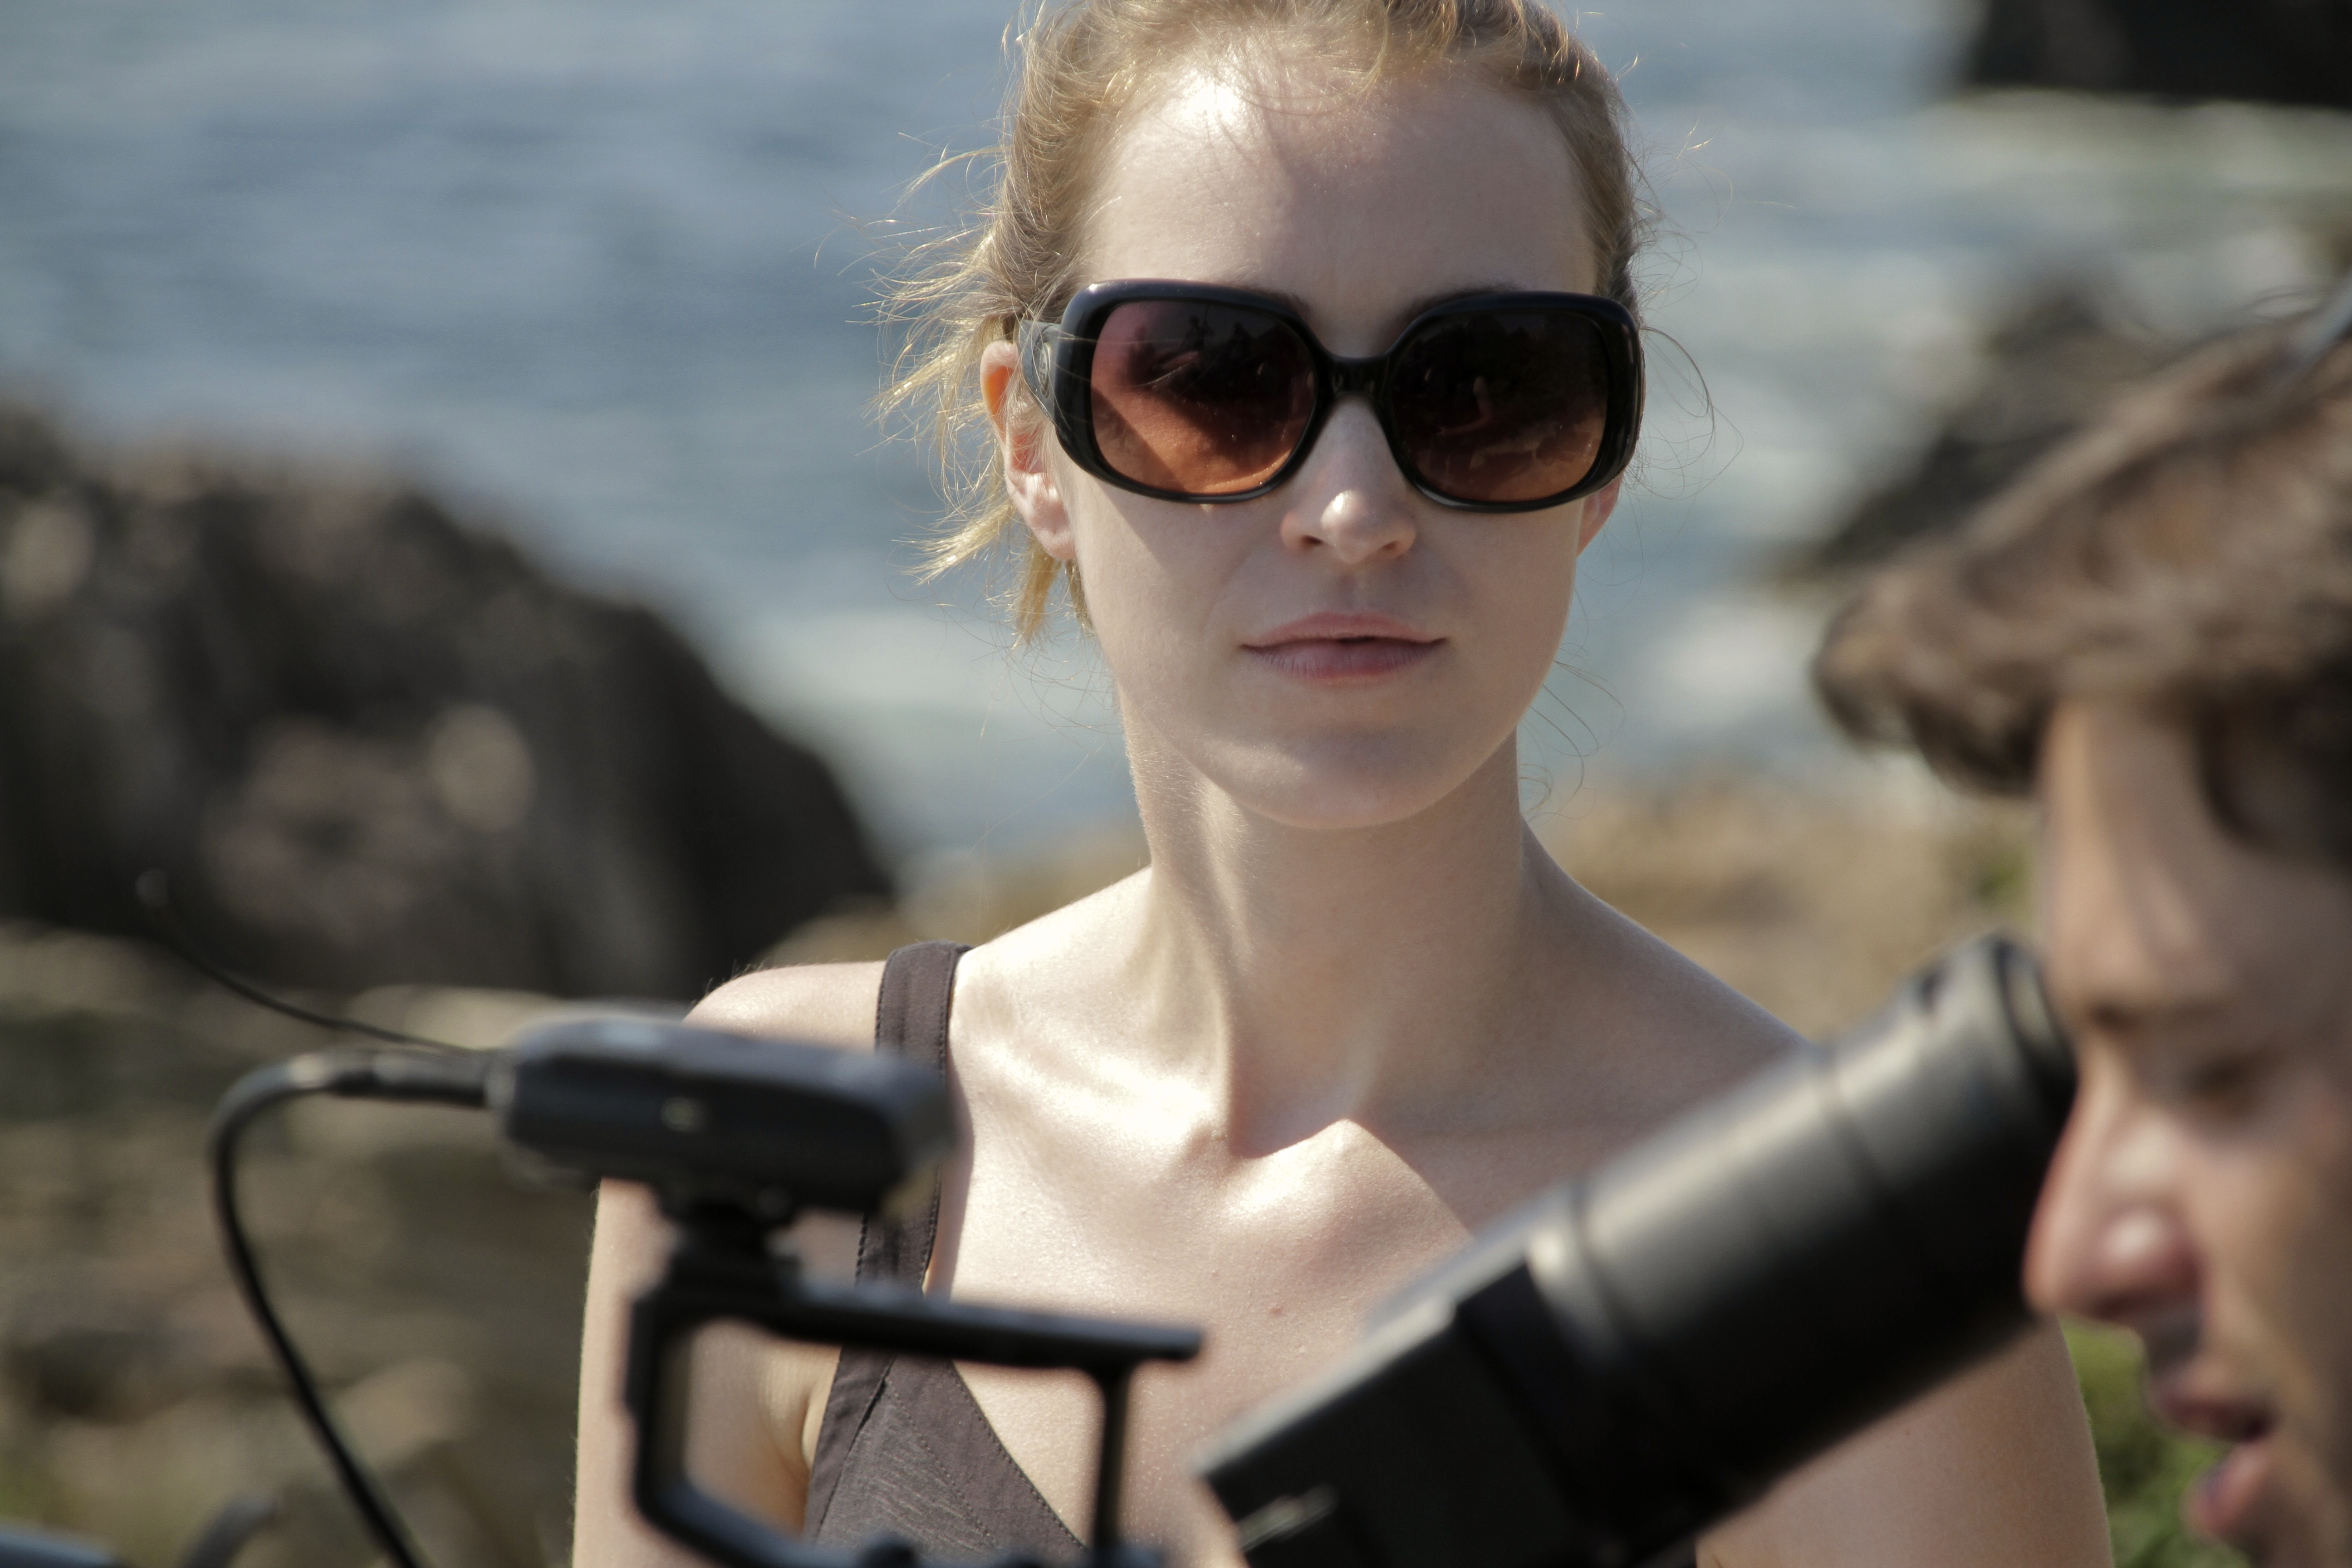 On location in Maine. Sofia Voltin directing YouStar: Road to Fame. August 2013